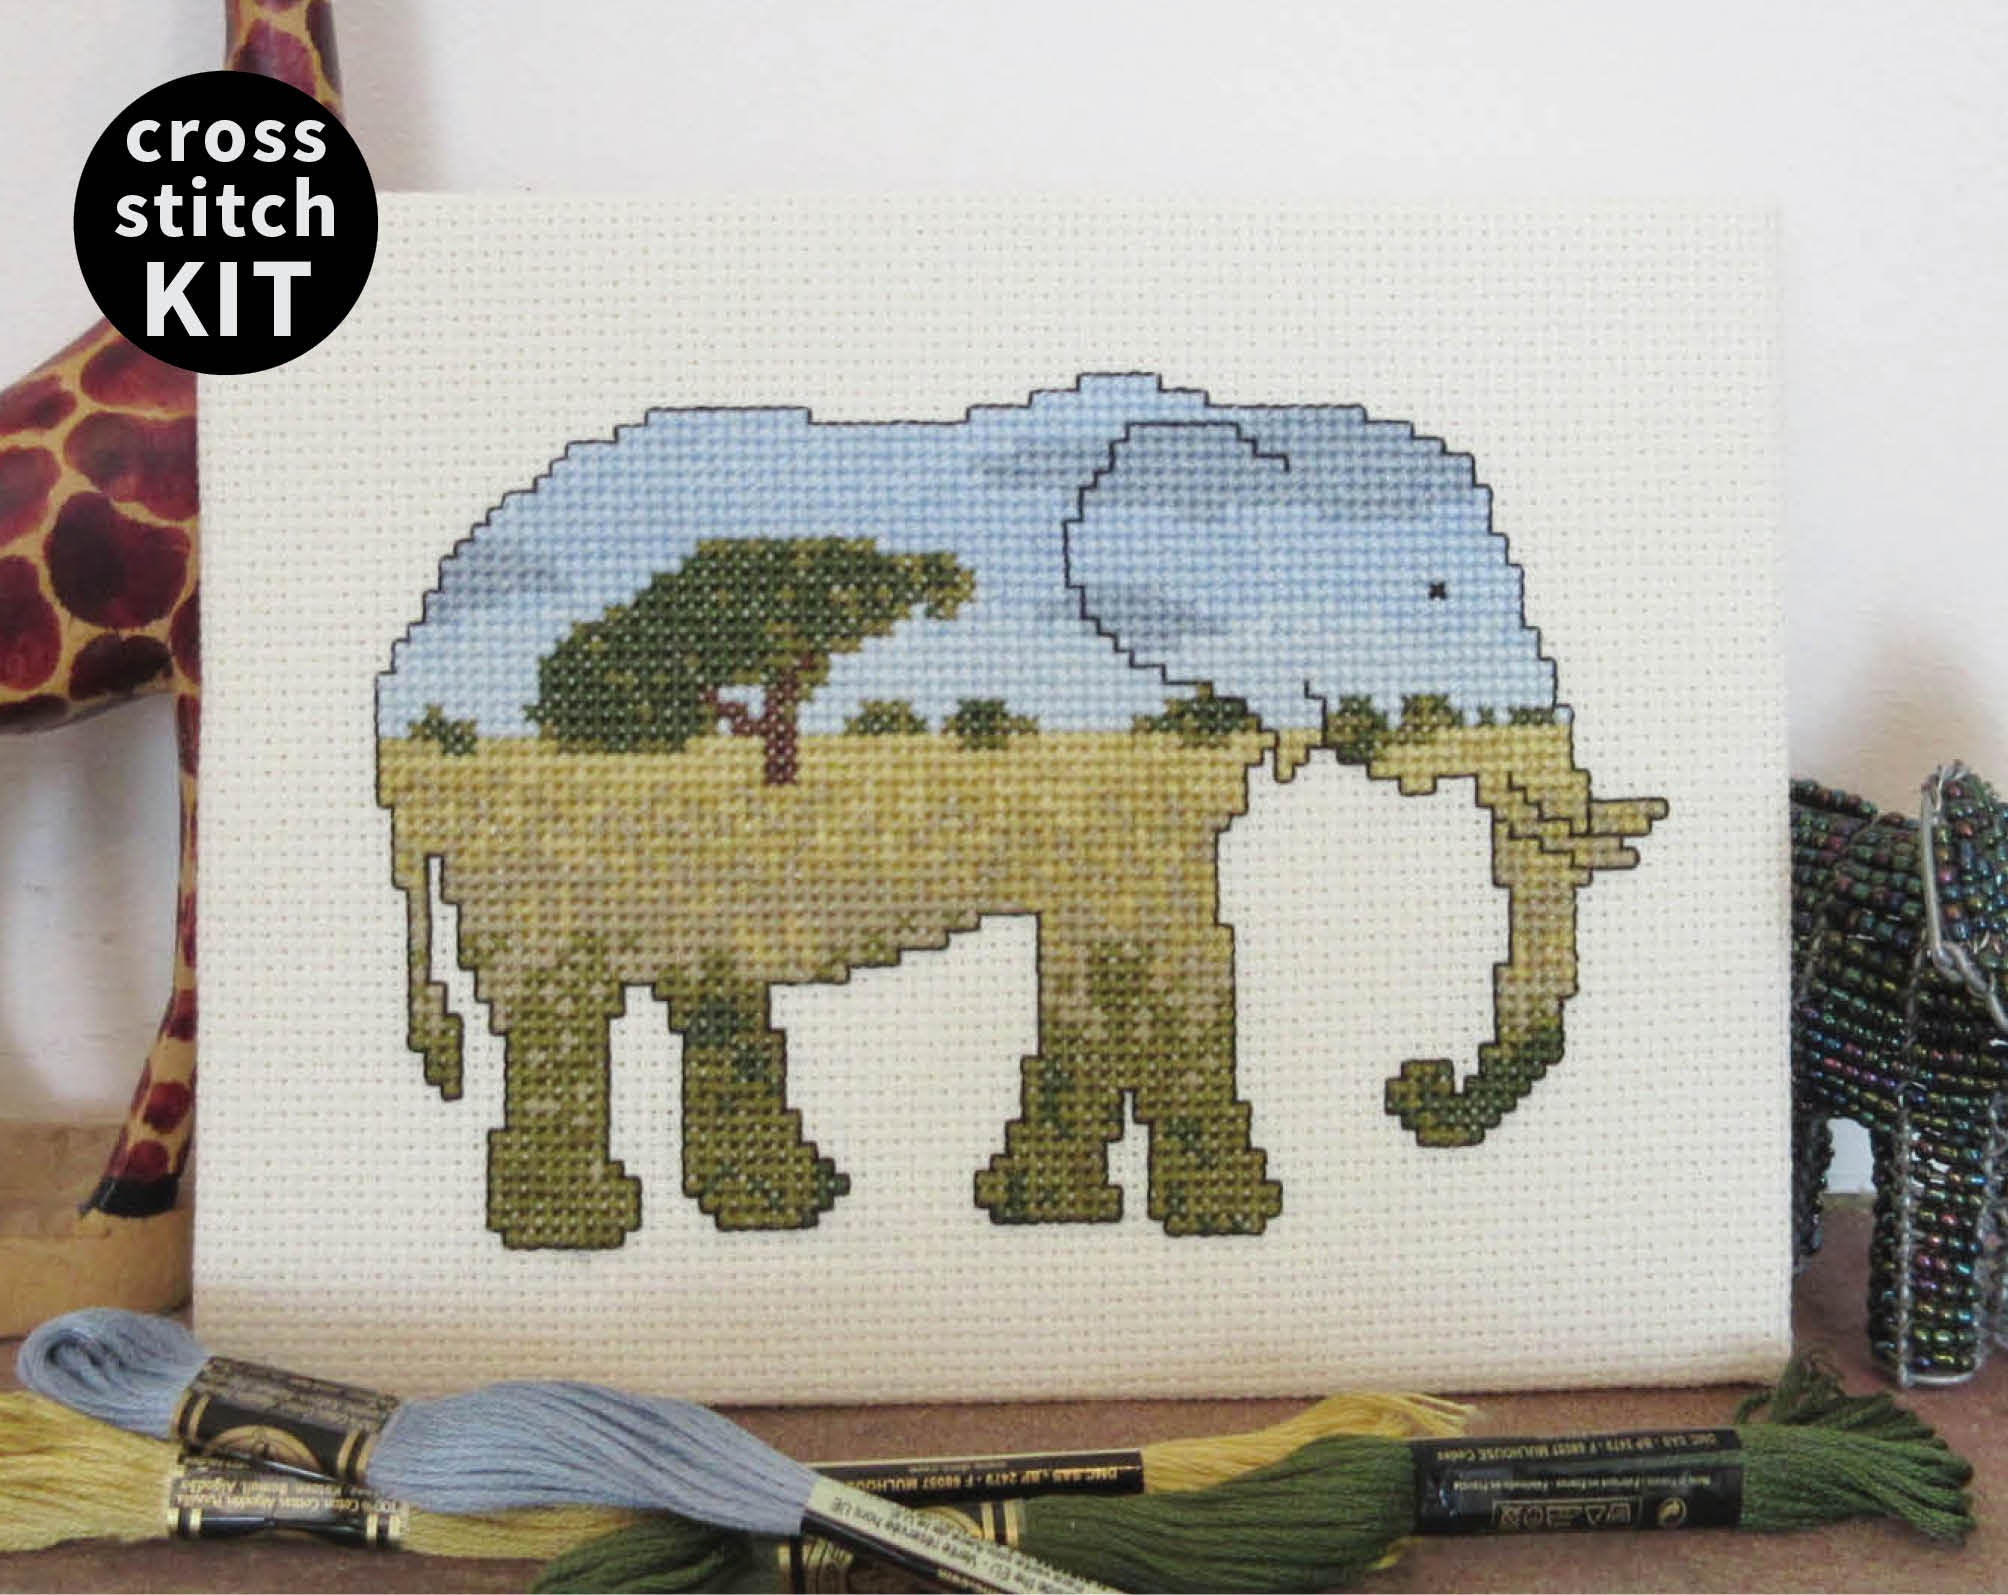 Elephant cross stitch kit - everything you need to stitch a silhouette of an elephant filled with a scene of the African savannah. Stitched piece with props.